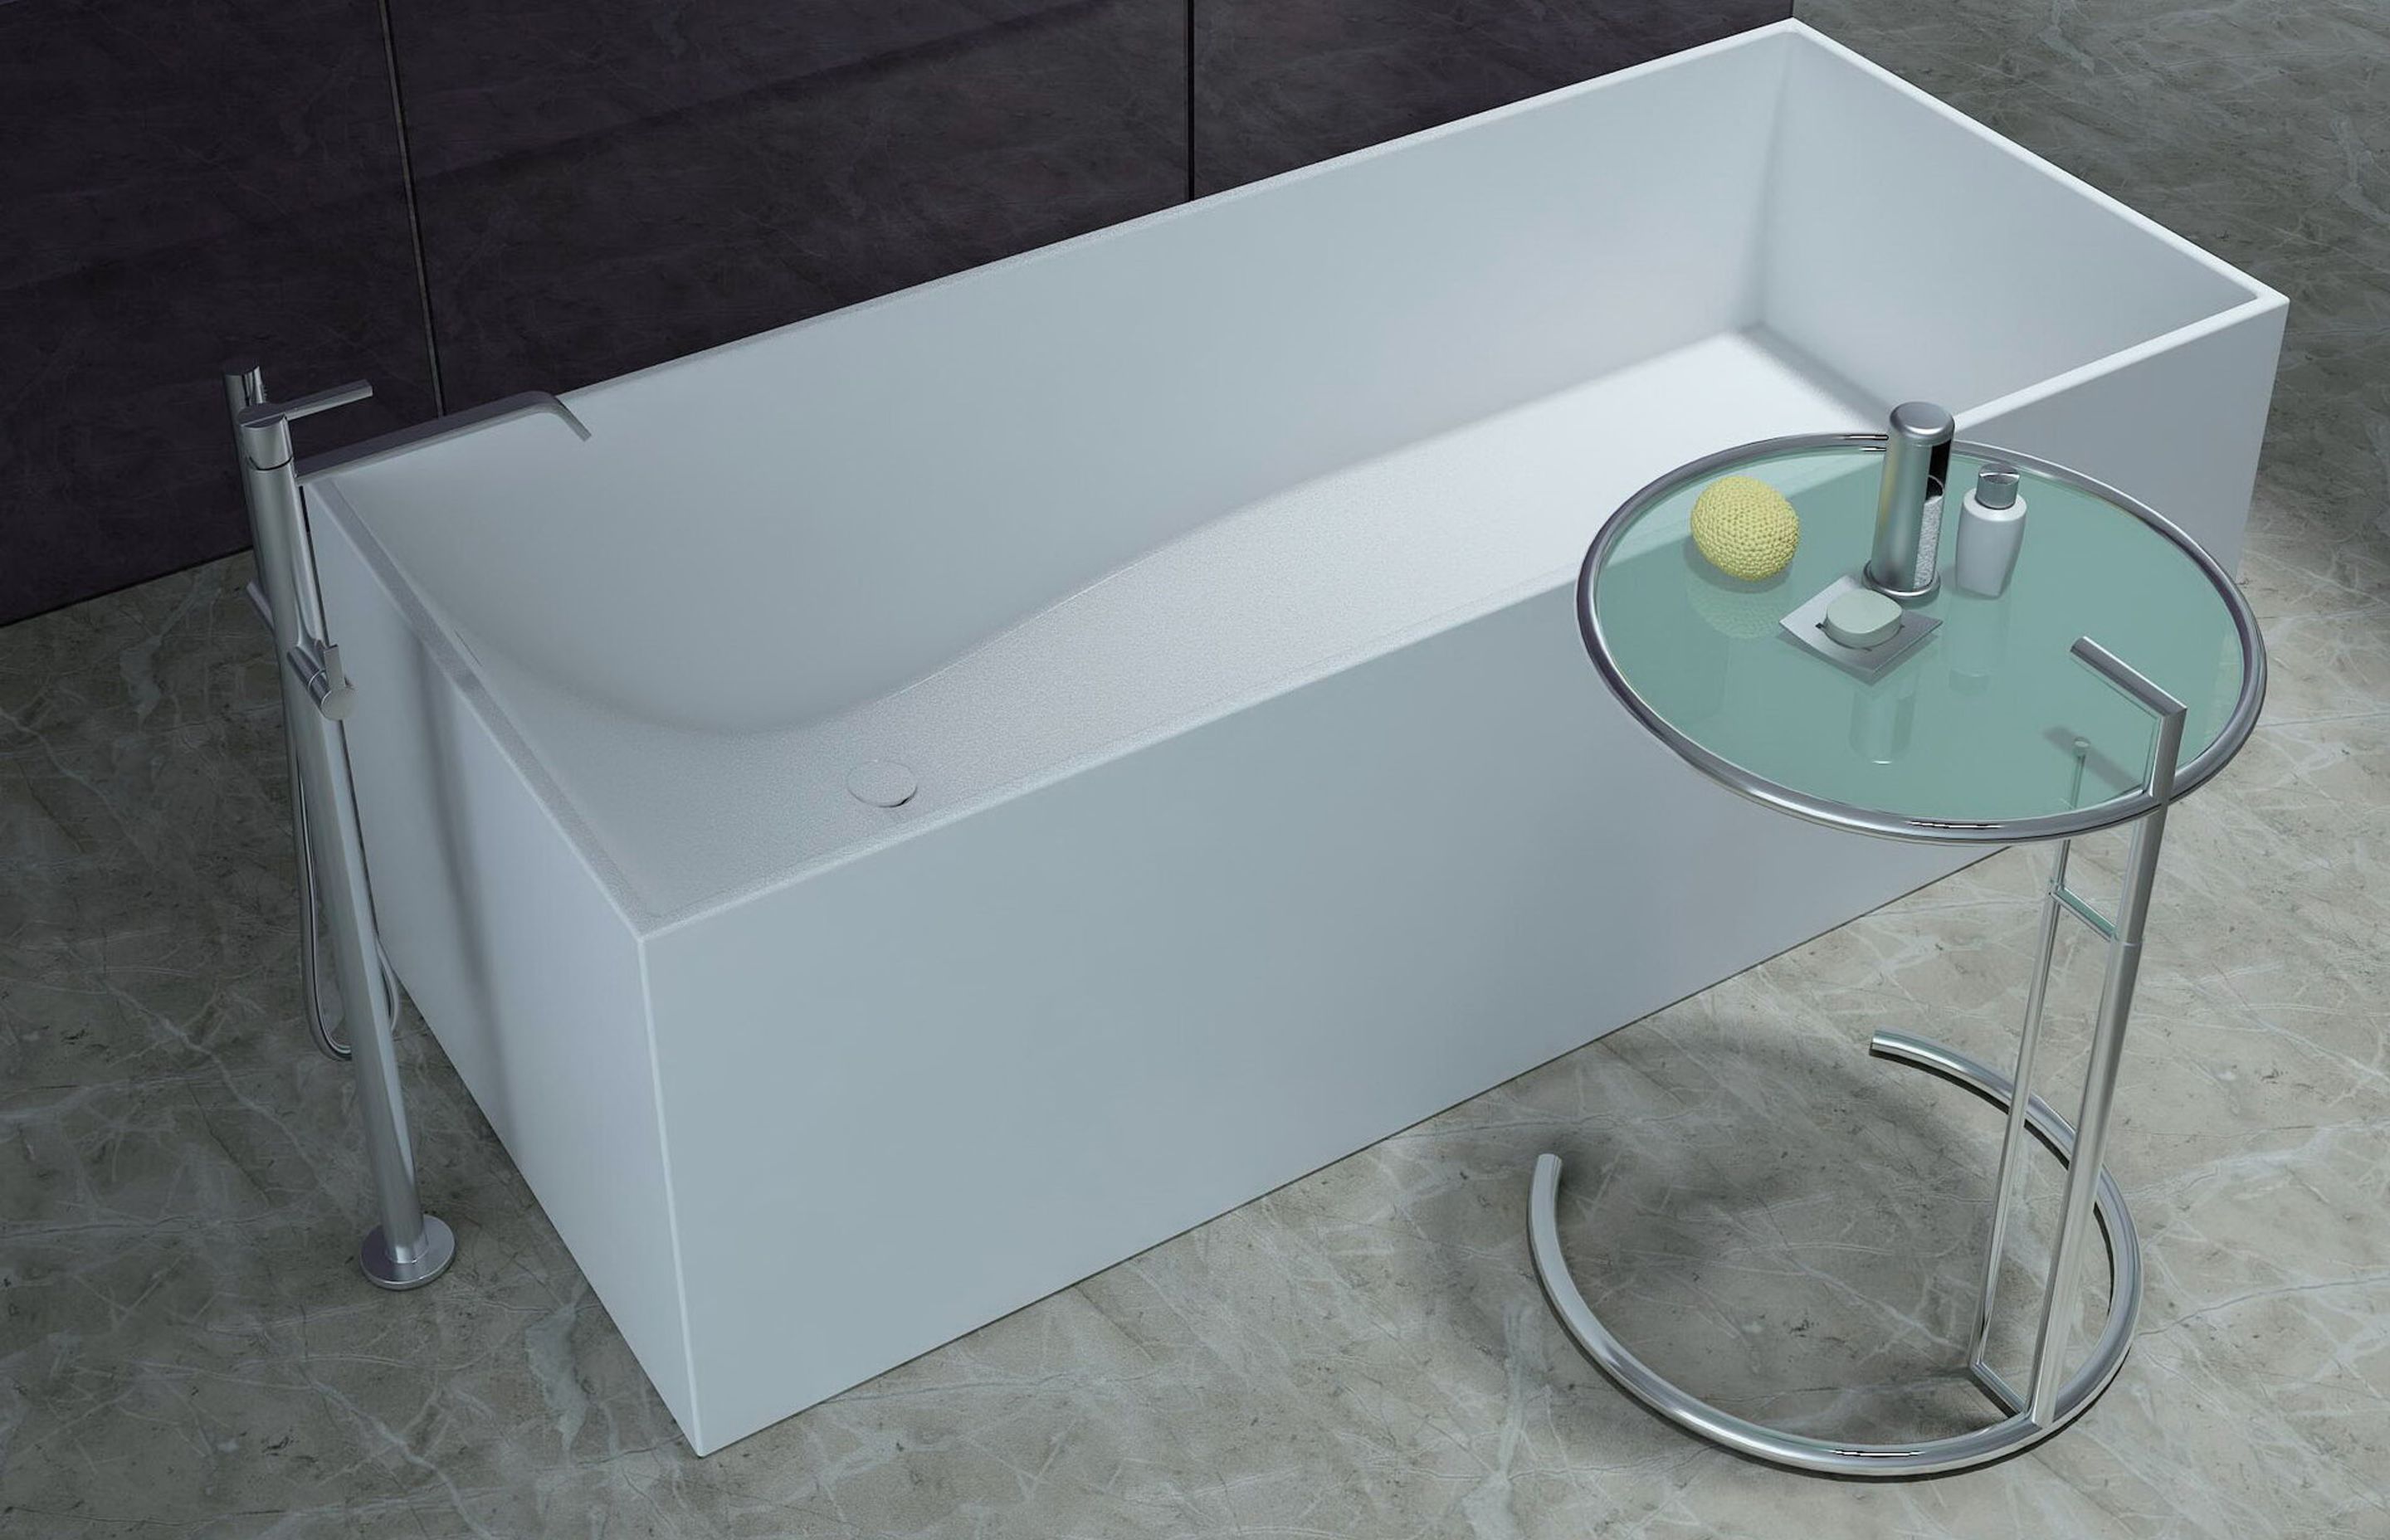 Accessories such as side tables become necessary for a luxury bathing experience, that's why it's important to factor in any other free-standing items into your bathroom design.